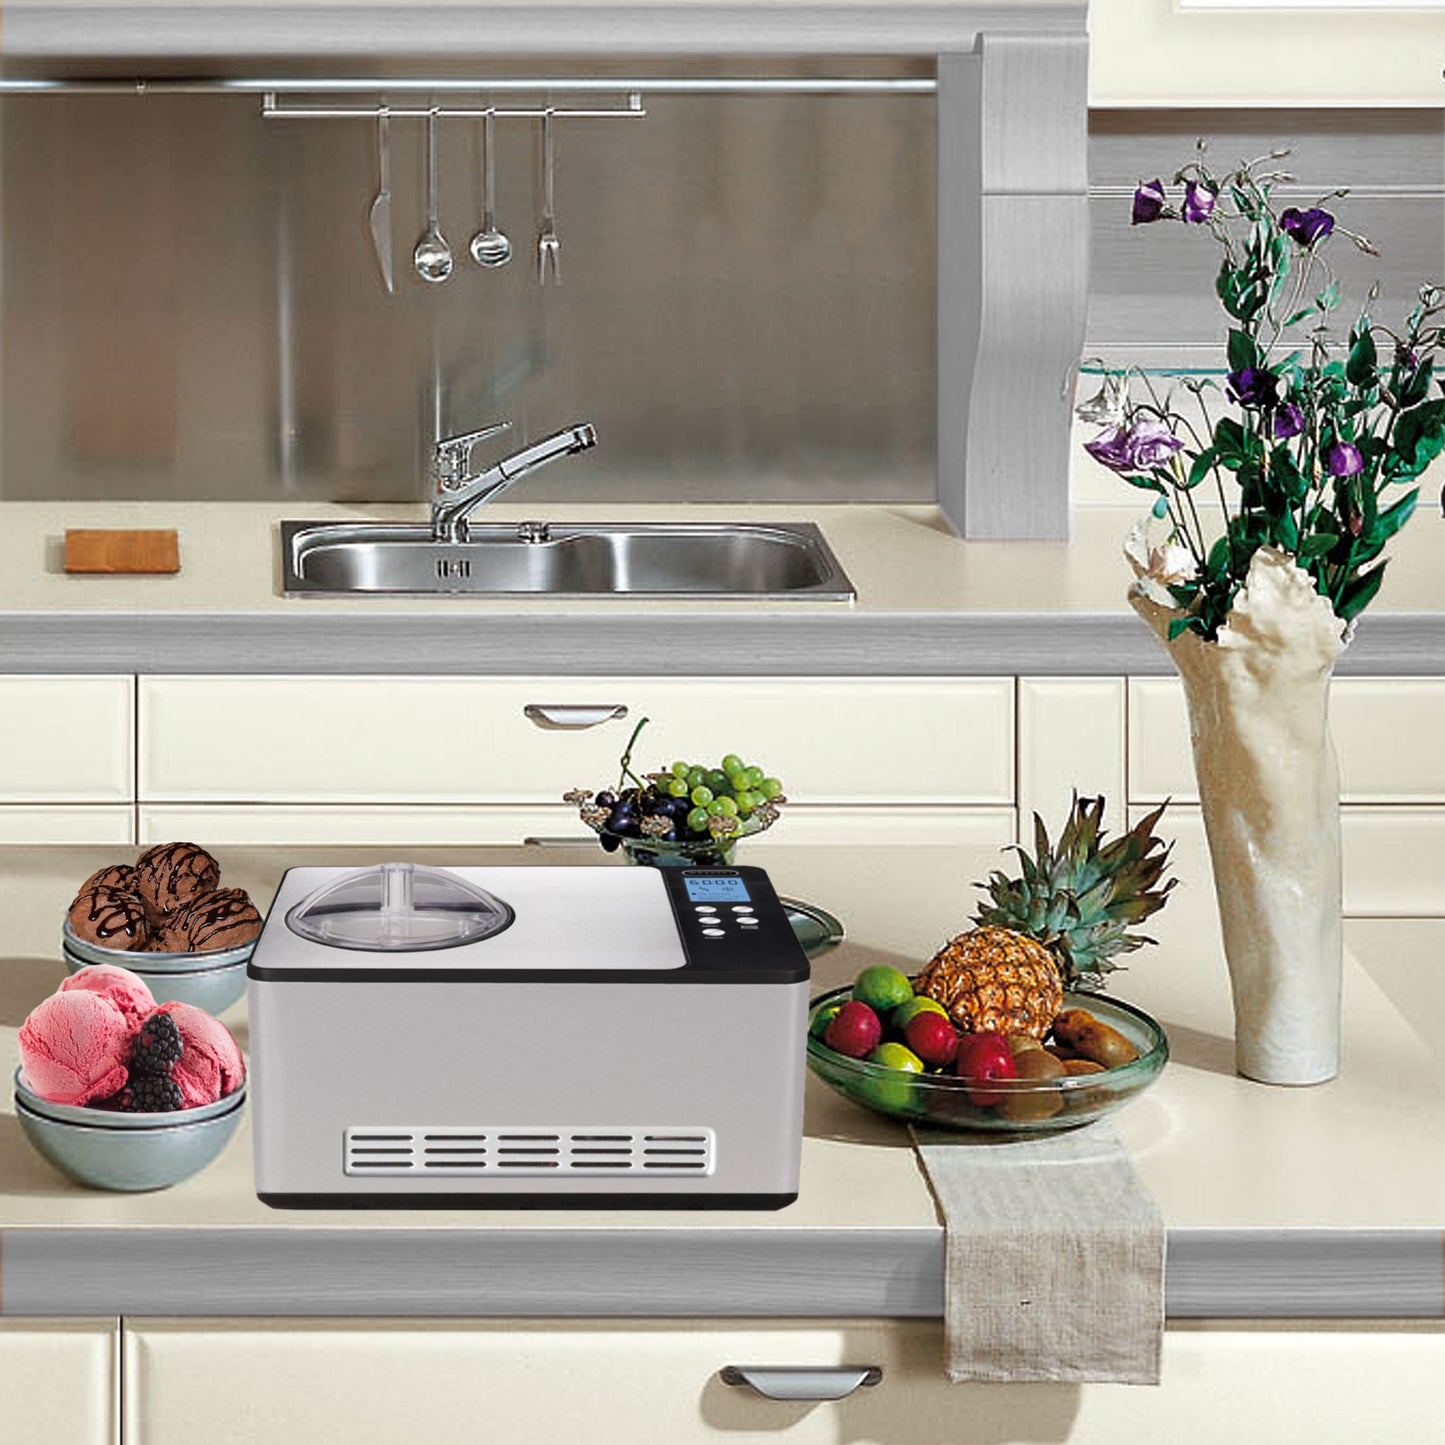 A kitchen counter with a stainless steel ice cream maker and yogurt function.